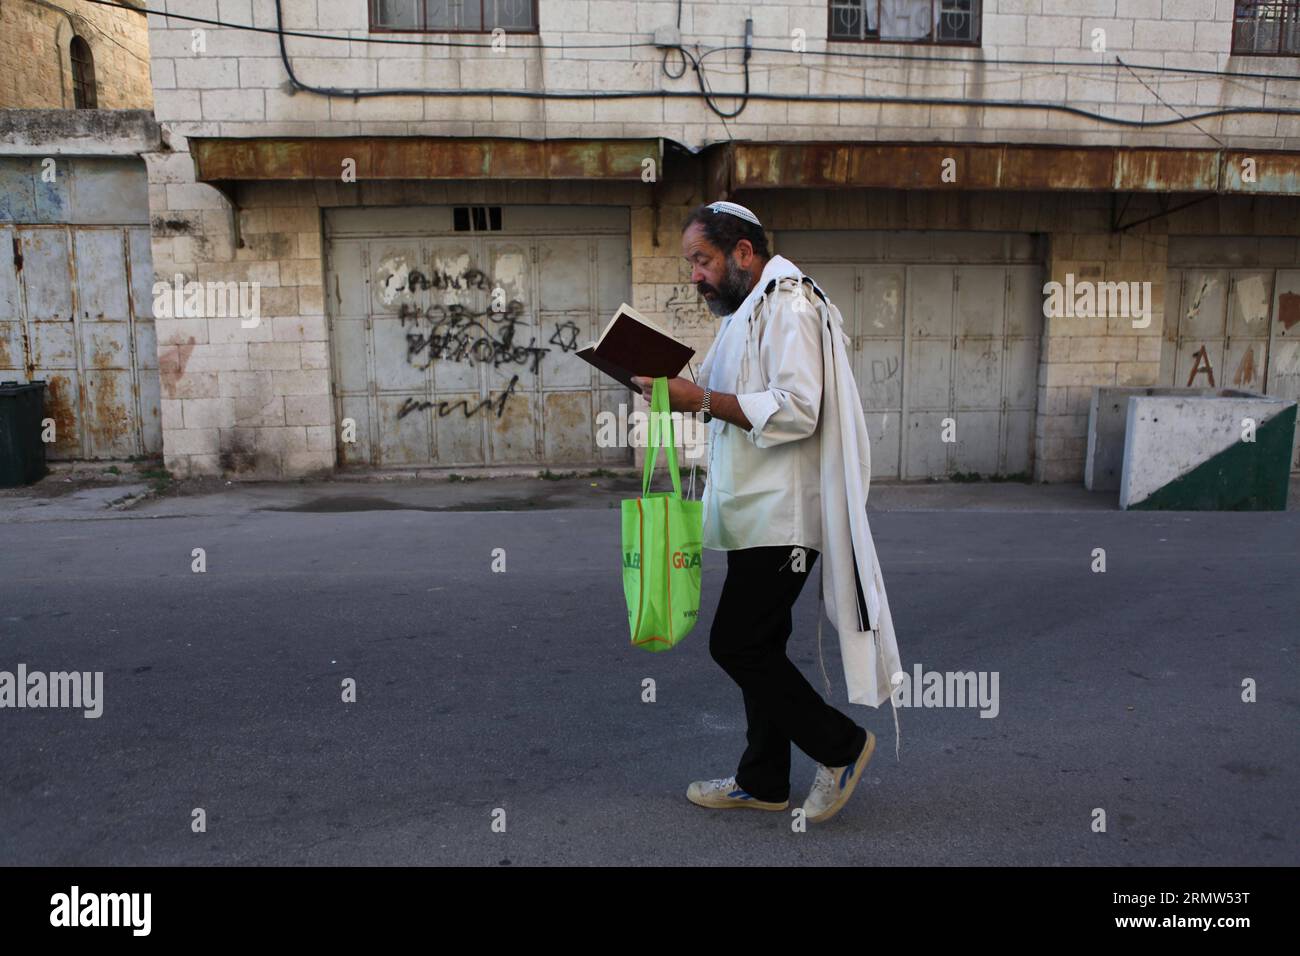 (141004) -- HEBRON, Oct. 4, 2014 -- A Jewish worshiper walks near the al-Ibrahimi mosque, a religious site to Muslims, in the West Bank City of Hebron on Oct. 4, 2014. The Jewish fast of Yom Kippur is coinciding with the Muslim festival of Eid al-Adha for the first time in three decades. The concurrence of the holy days has not occurred for 33 years because the two faiths use different lunar calendars. ) MIDEAST-HEBRON-JEWISH-MUSLIMS MamounxWazwaz PUBLICATIONxNOTxINxCHN   Hebron OCT 4 2014 a Jewish worshiper Walks Near The Al Ibrahimi Mosque a Religious Site to Muslims in The WEST Bank City of Stock Photo